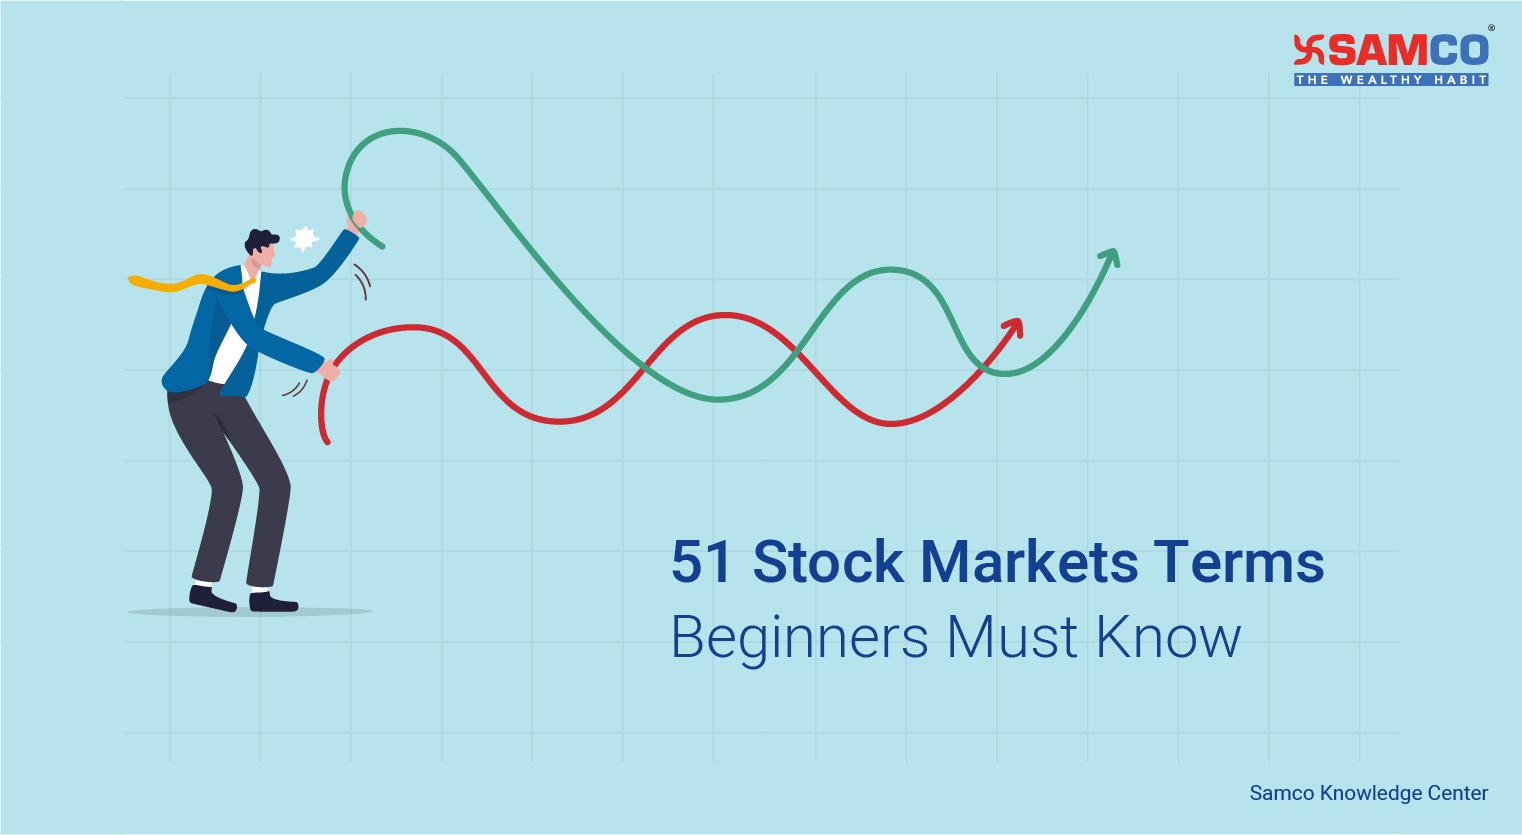 51 Stock Markets Terms Beginners Must Know